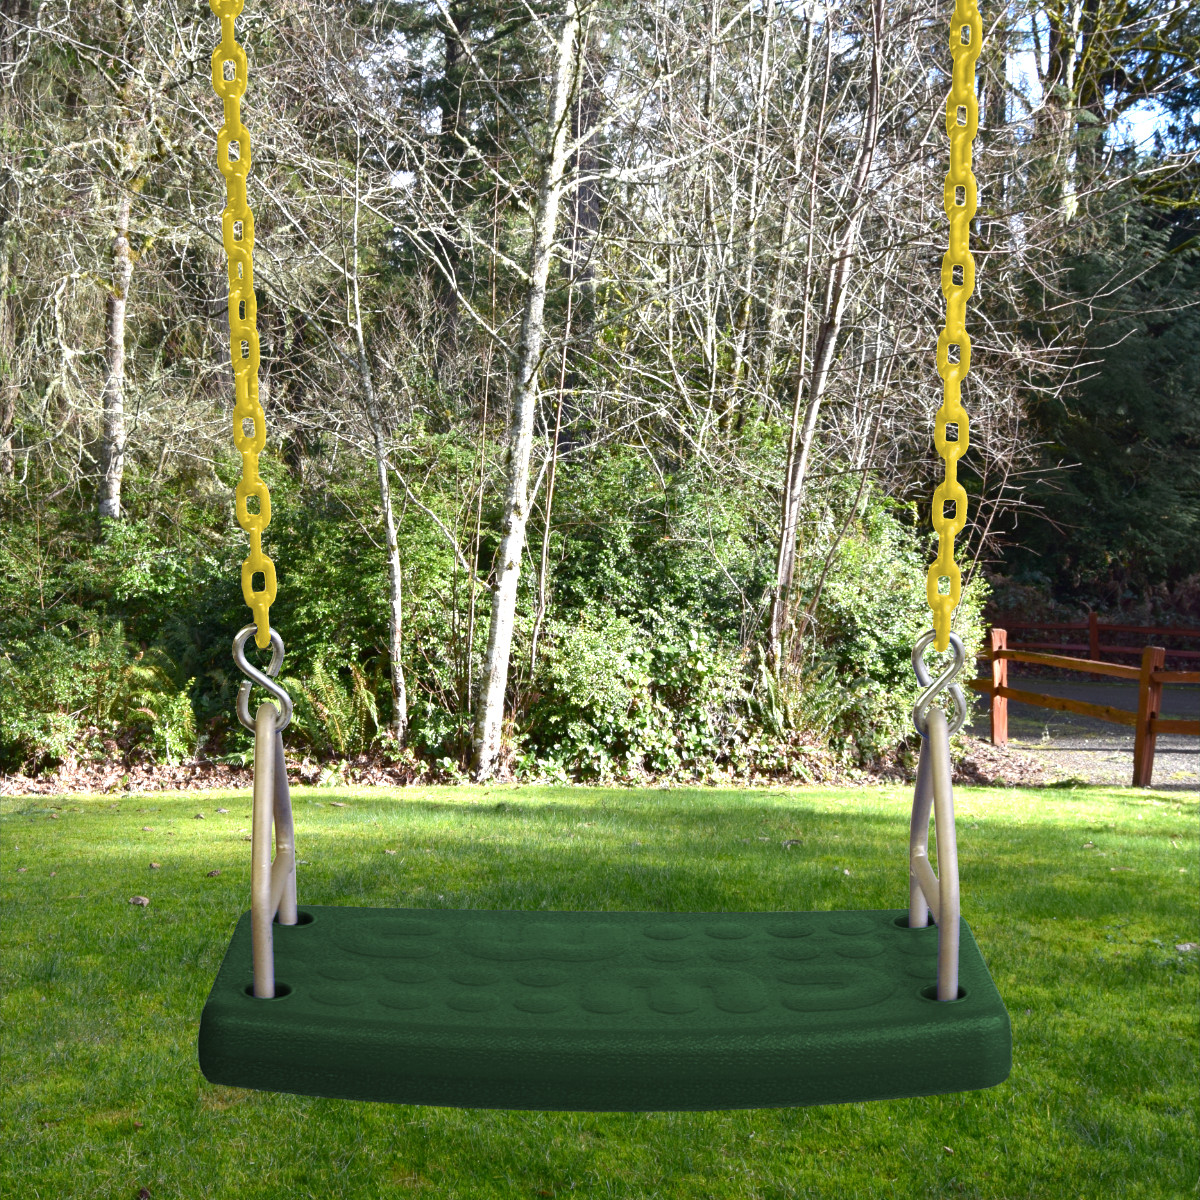 Molded Flat Swing Seat with Plastisol Chain (S-172)